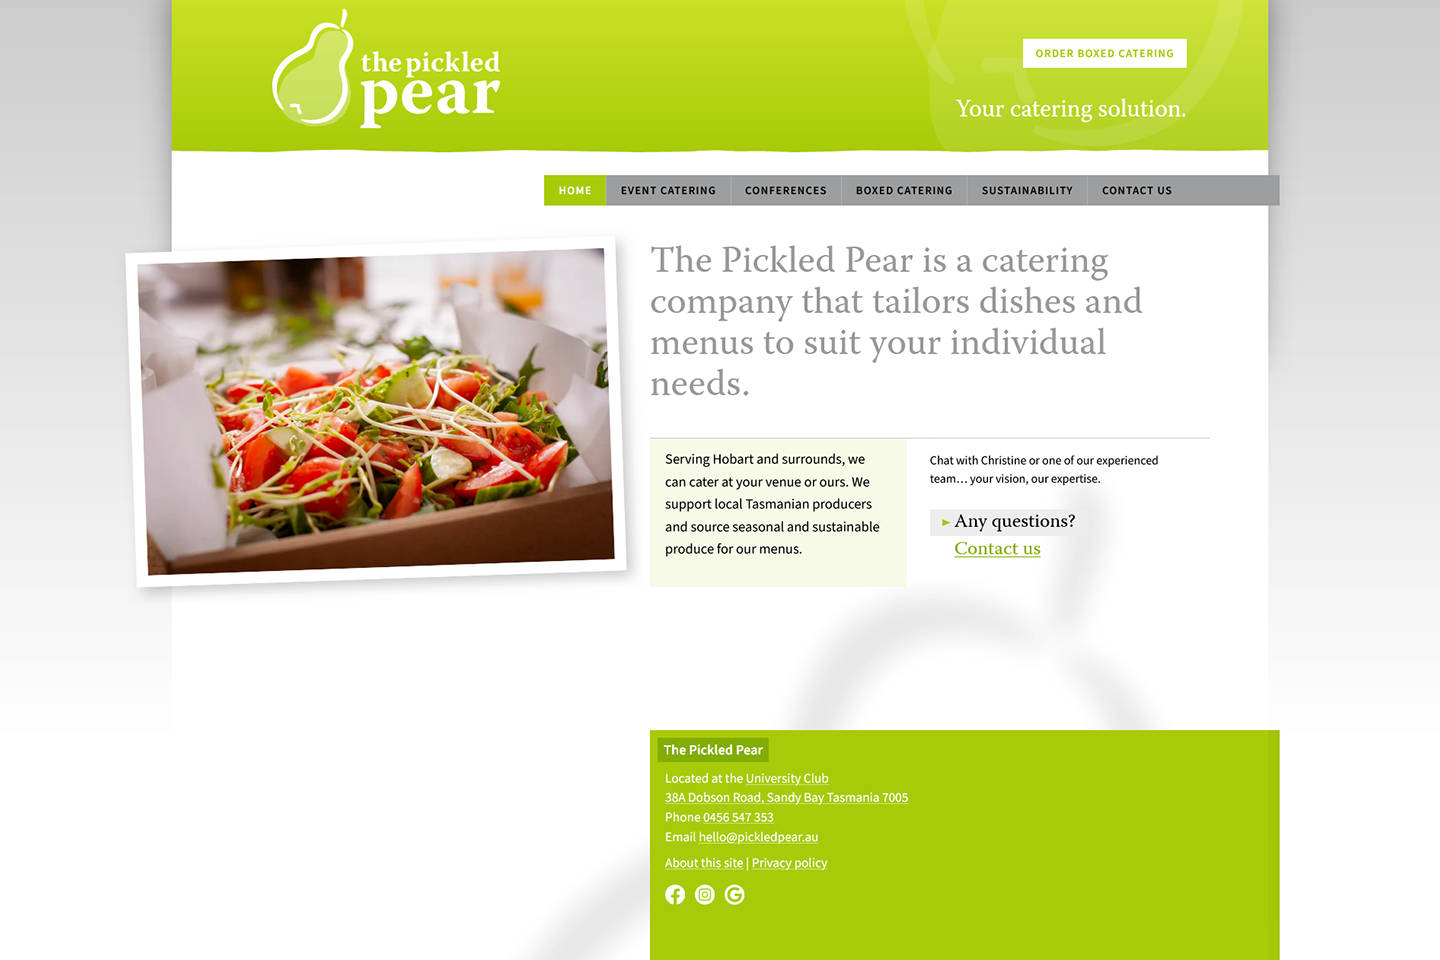 The Pickled Pear website